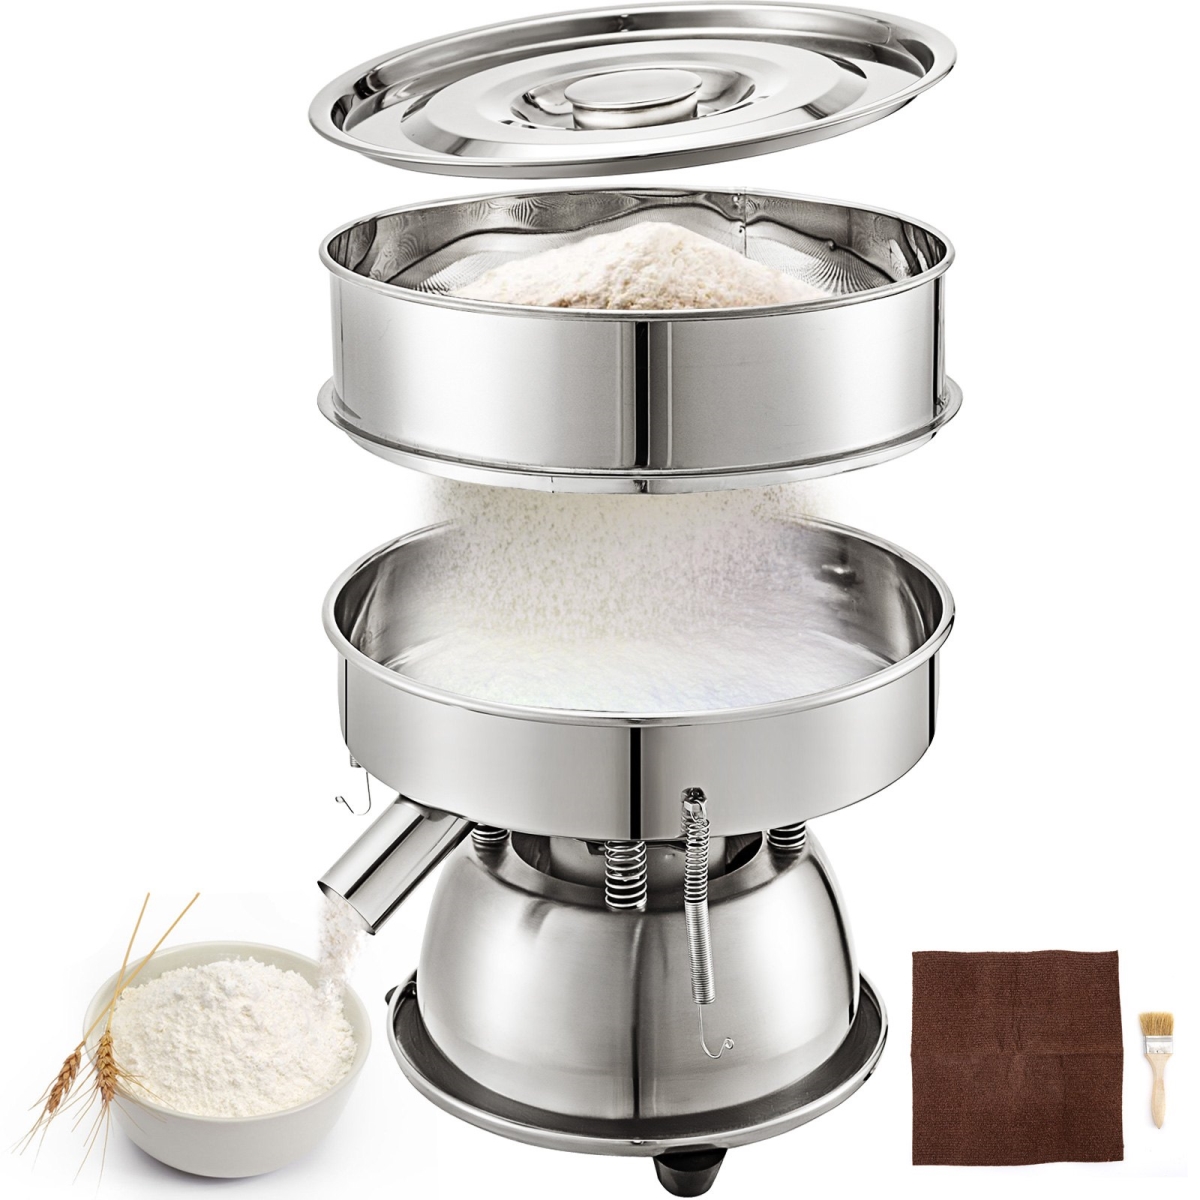 Picture of Vevor ZSJ40M60M00000001V1 Automatic Sieve Shaker Included 40 Mesh Plus 60 Mesh Flour Sifter Electric Vibrating Sieve Machine 110V 50W Sifter Shaker Machine 1150 r&min for Flours